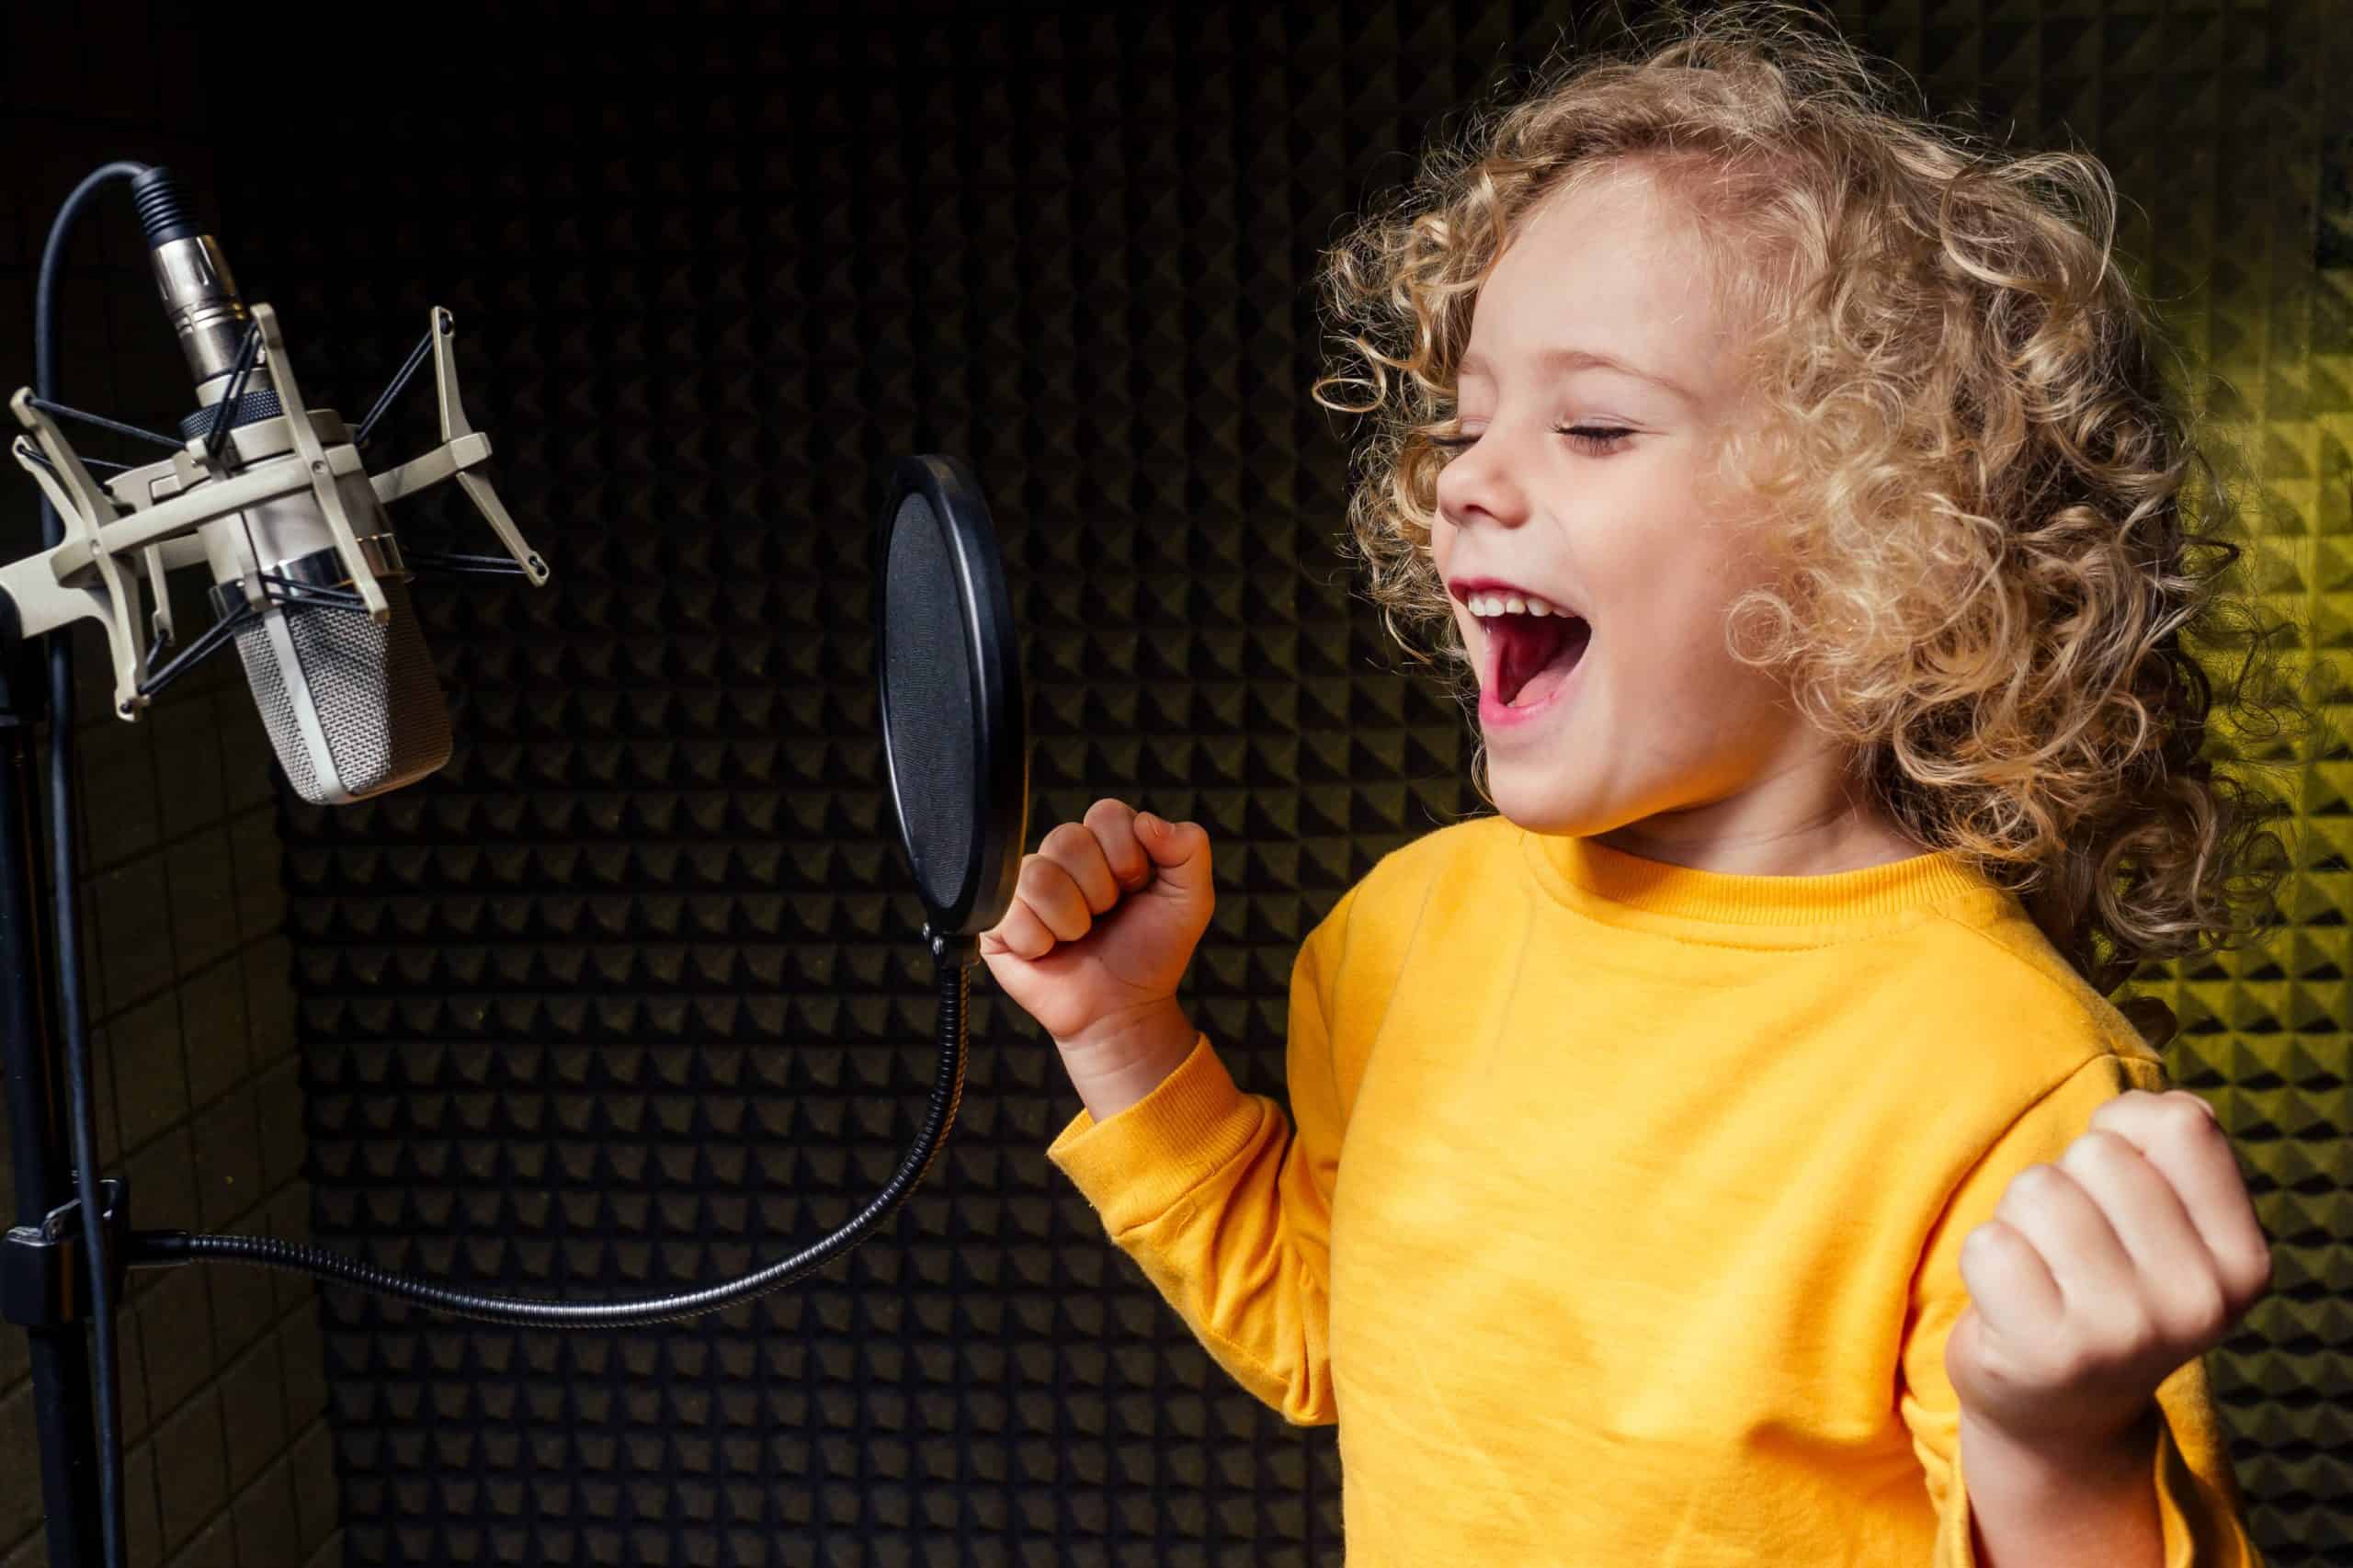 Advice for parents of children with singing careers